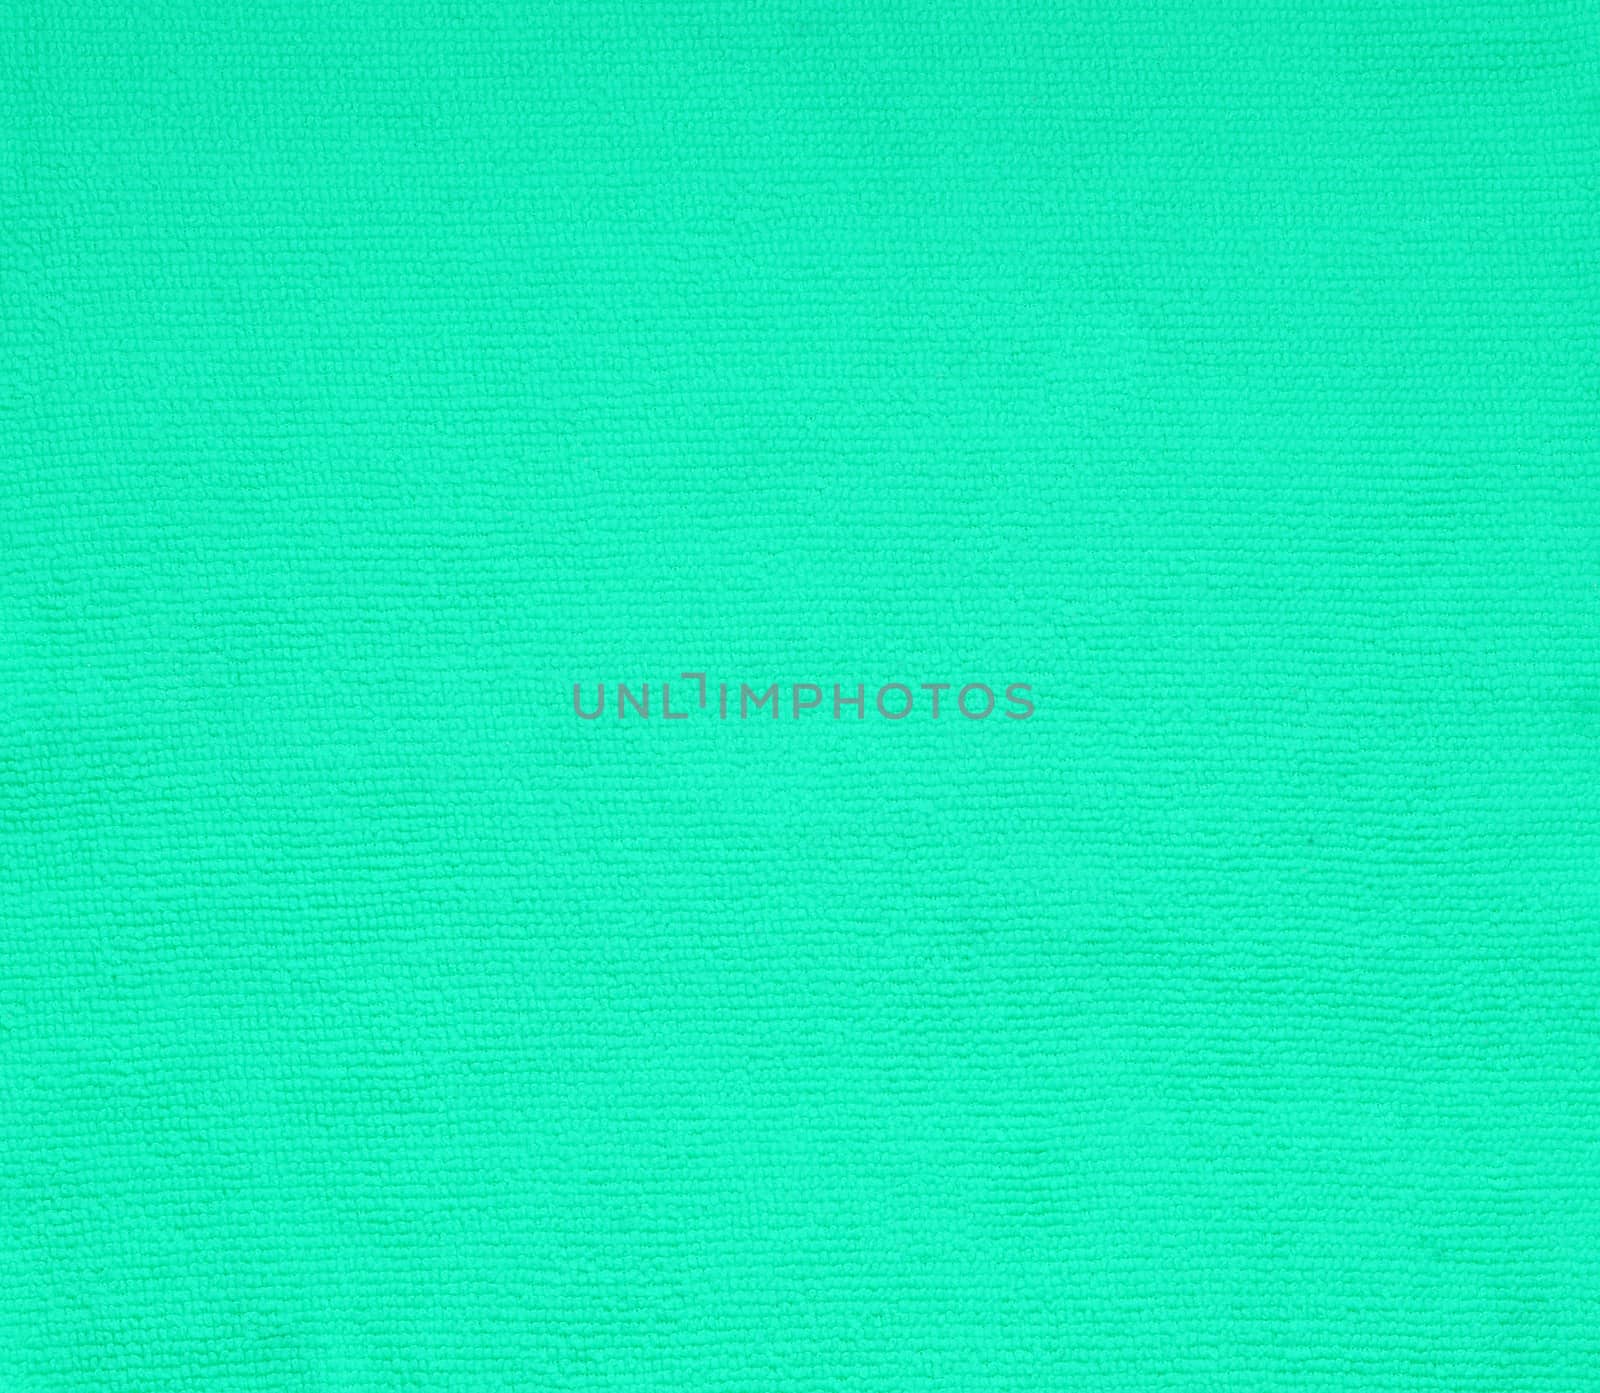 surface green fabric texture for background